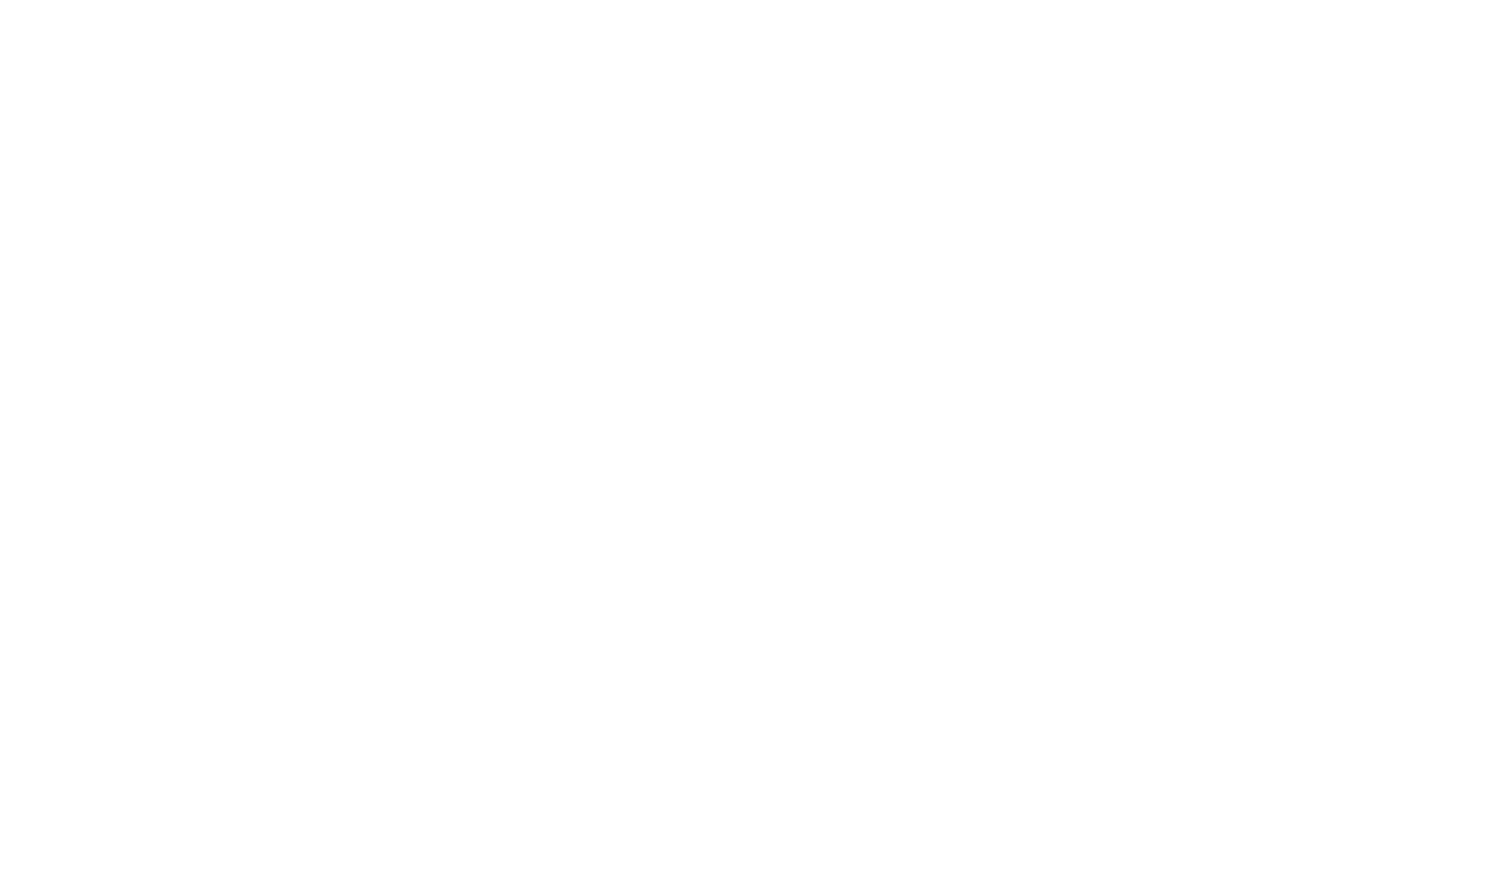 FBE Woodliving